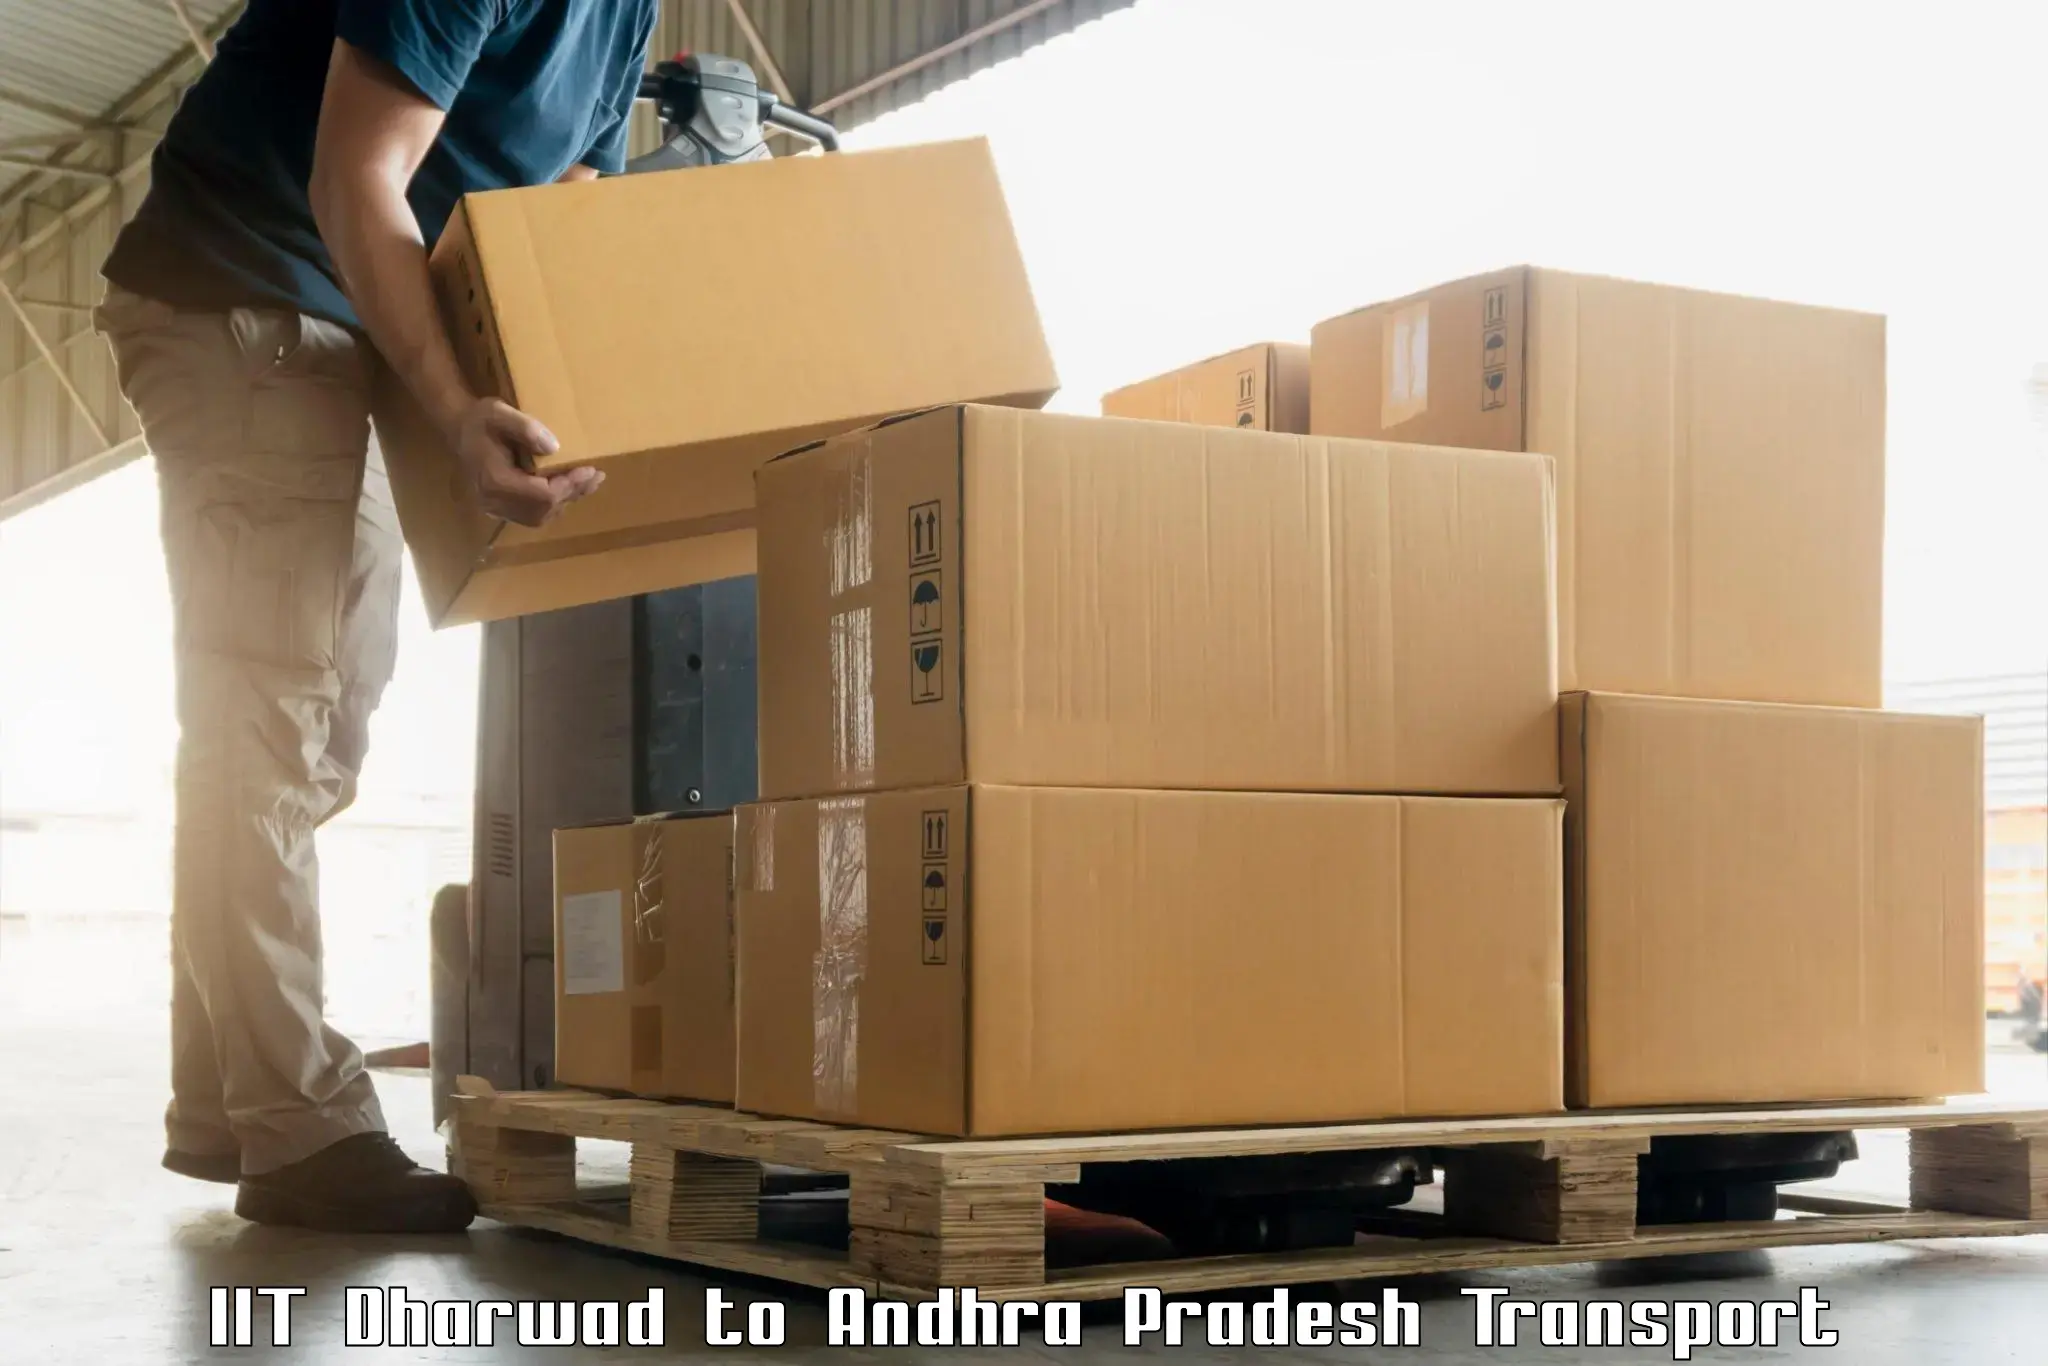 Daily parcel service transport IIT Dharwad to Chitrada